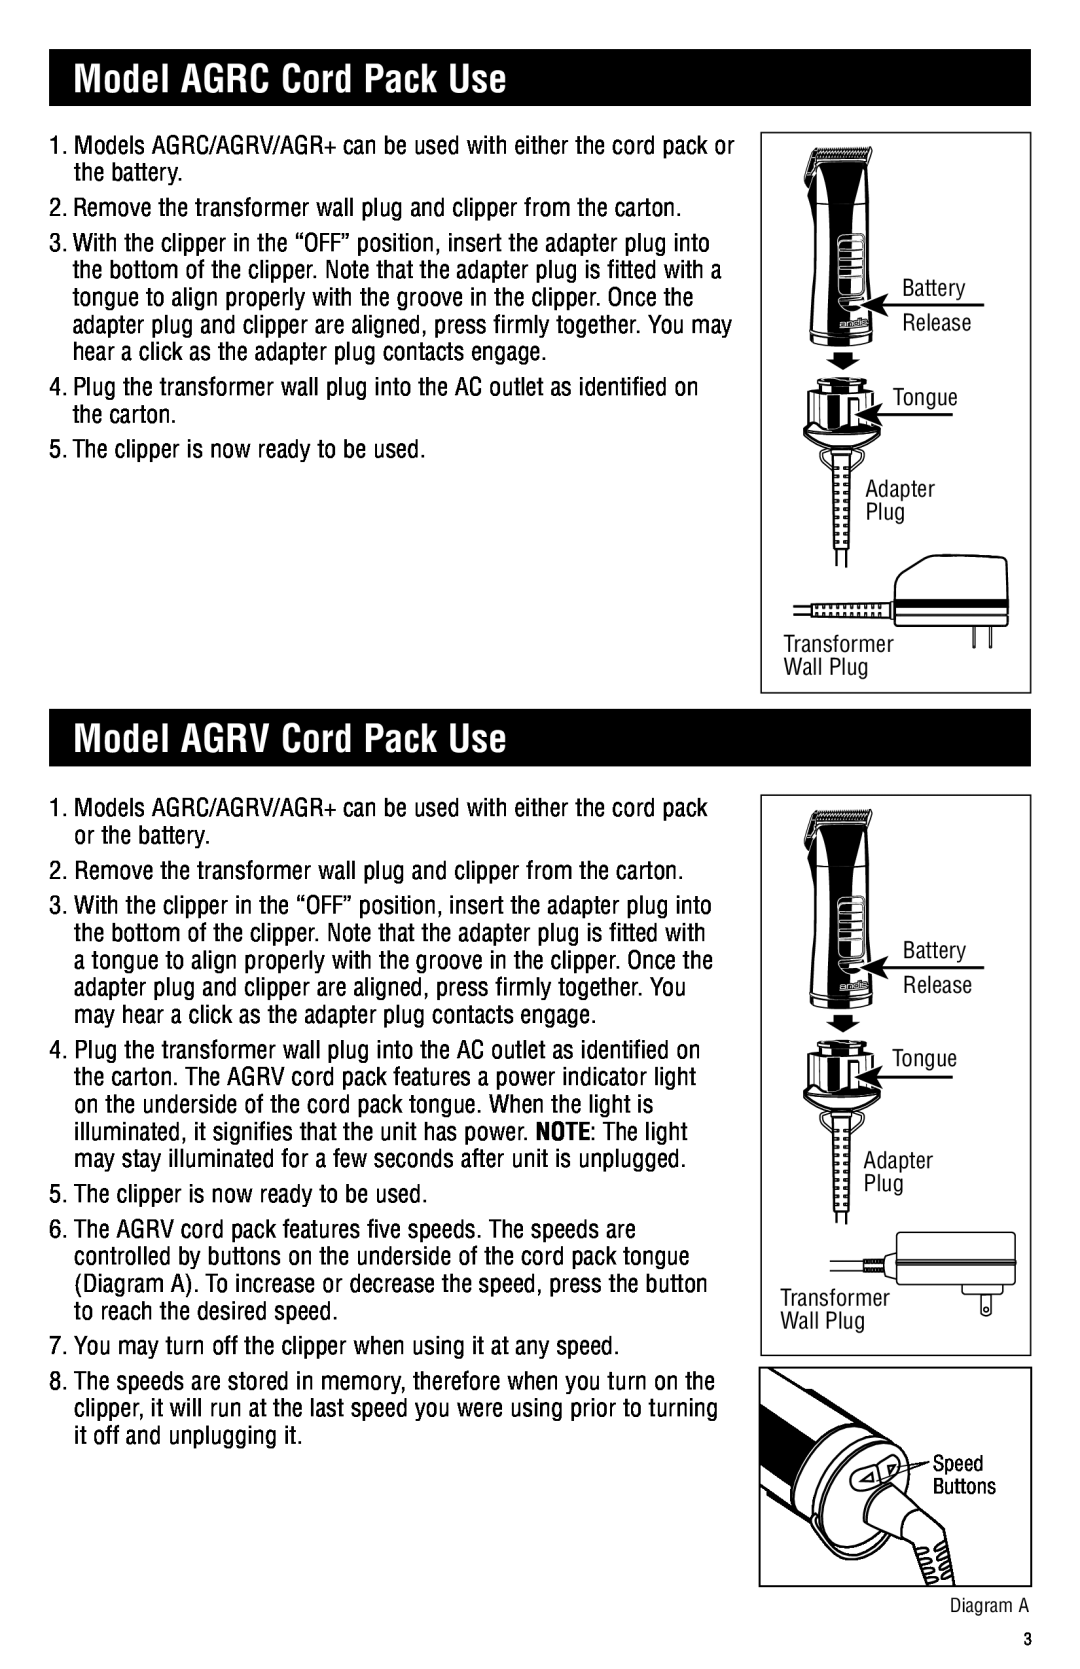 Andis Company manual Model AGRC Cord Pack Use, Model AGRV Cord Pack Use 